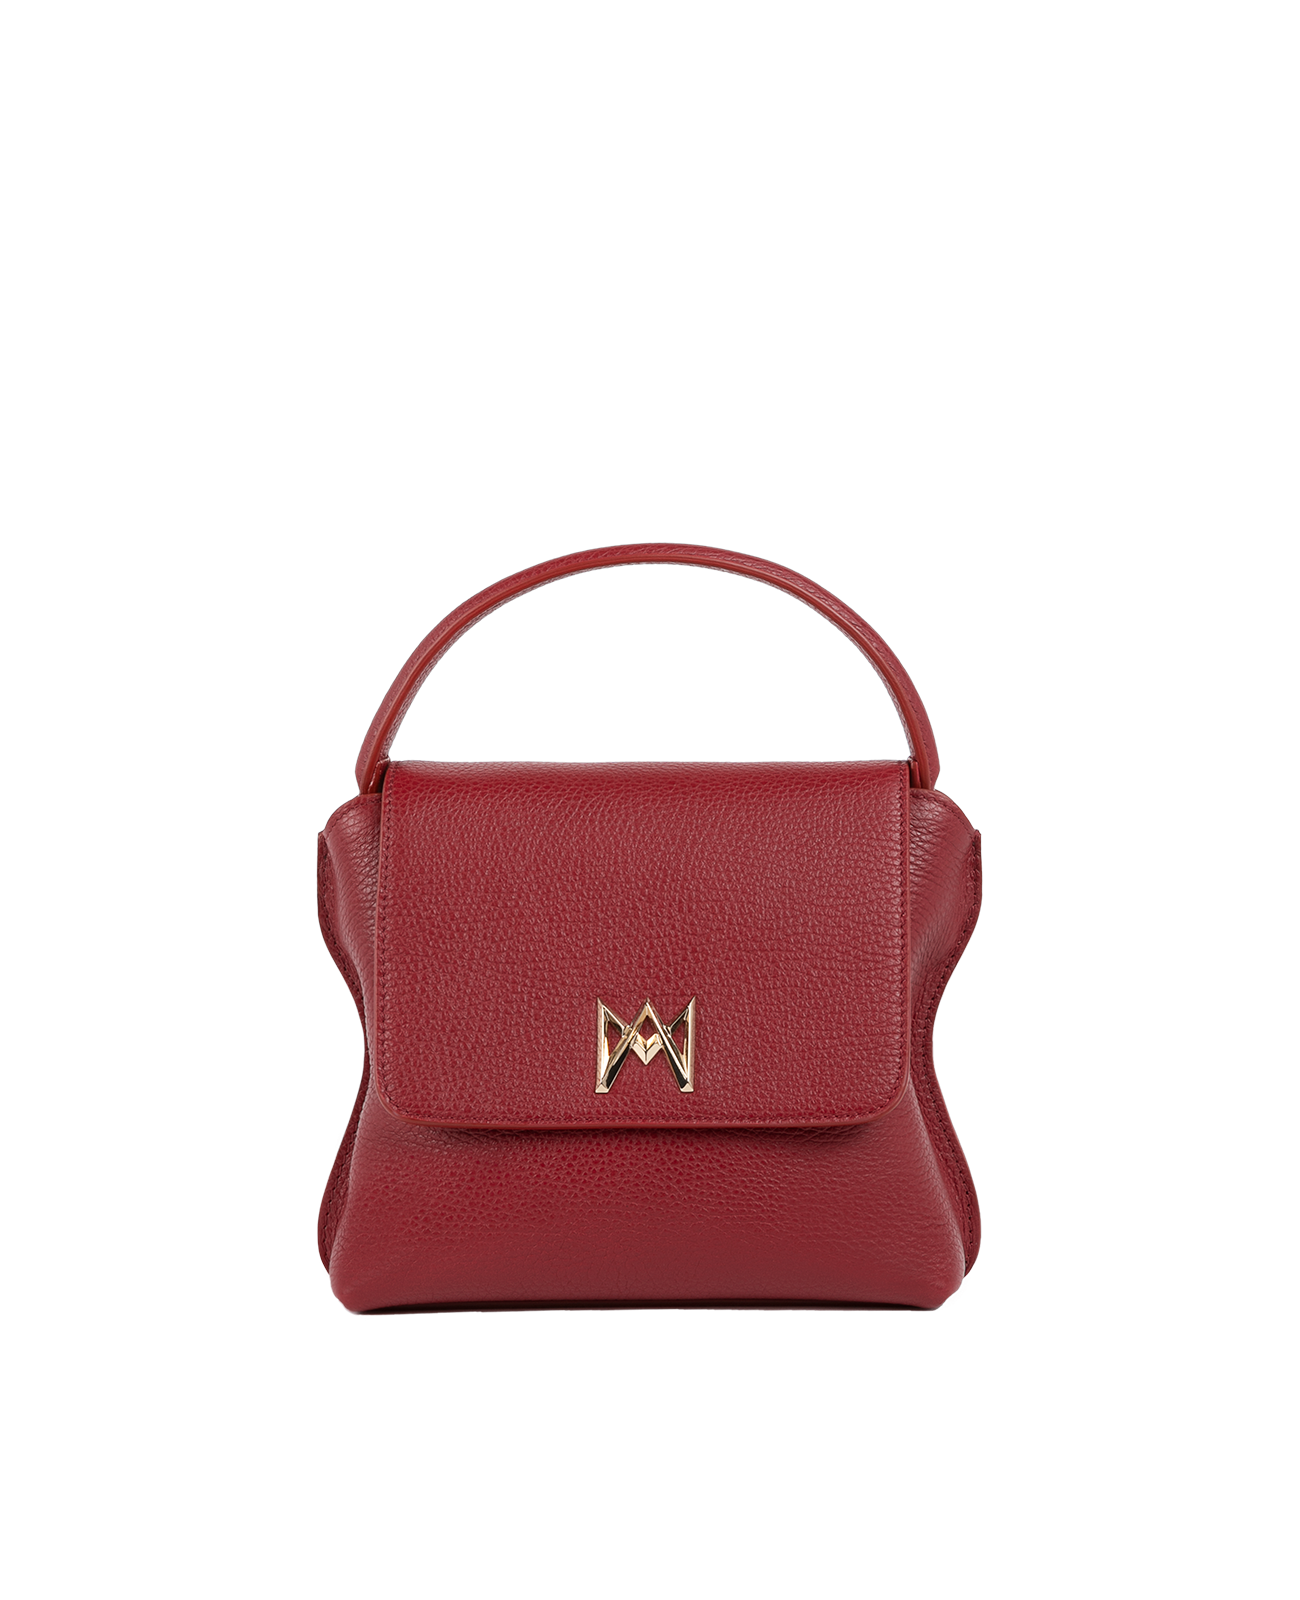 Cross-body bag in Italian full-grain leather, semi-aniline calf Italian leather with detachable shoulder strap.Three compartments, zip pocket in the back compartment. Magnetic flap closure with logo. Color: Dark Red. Size:Medium